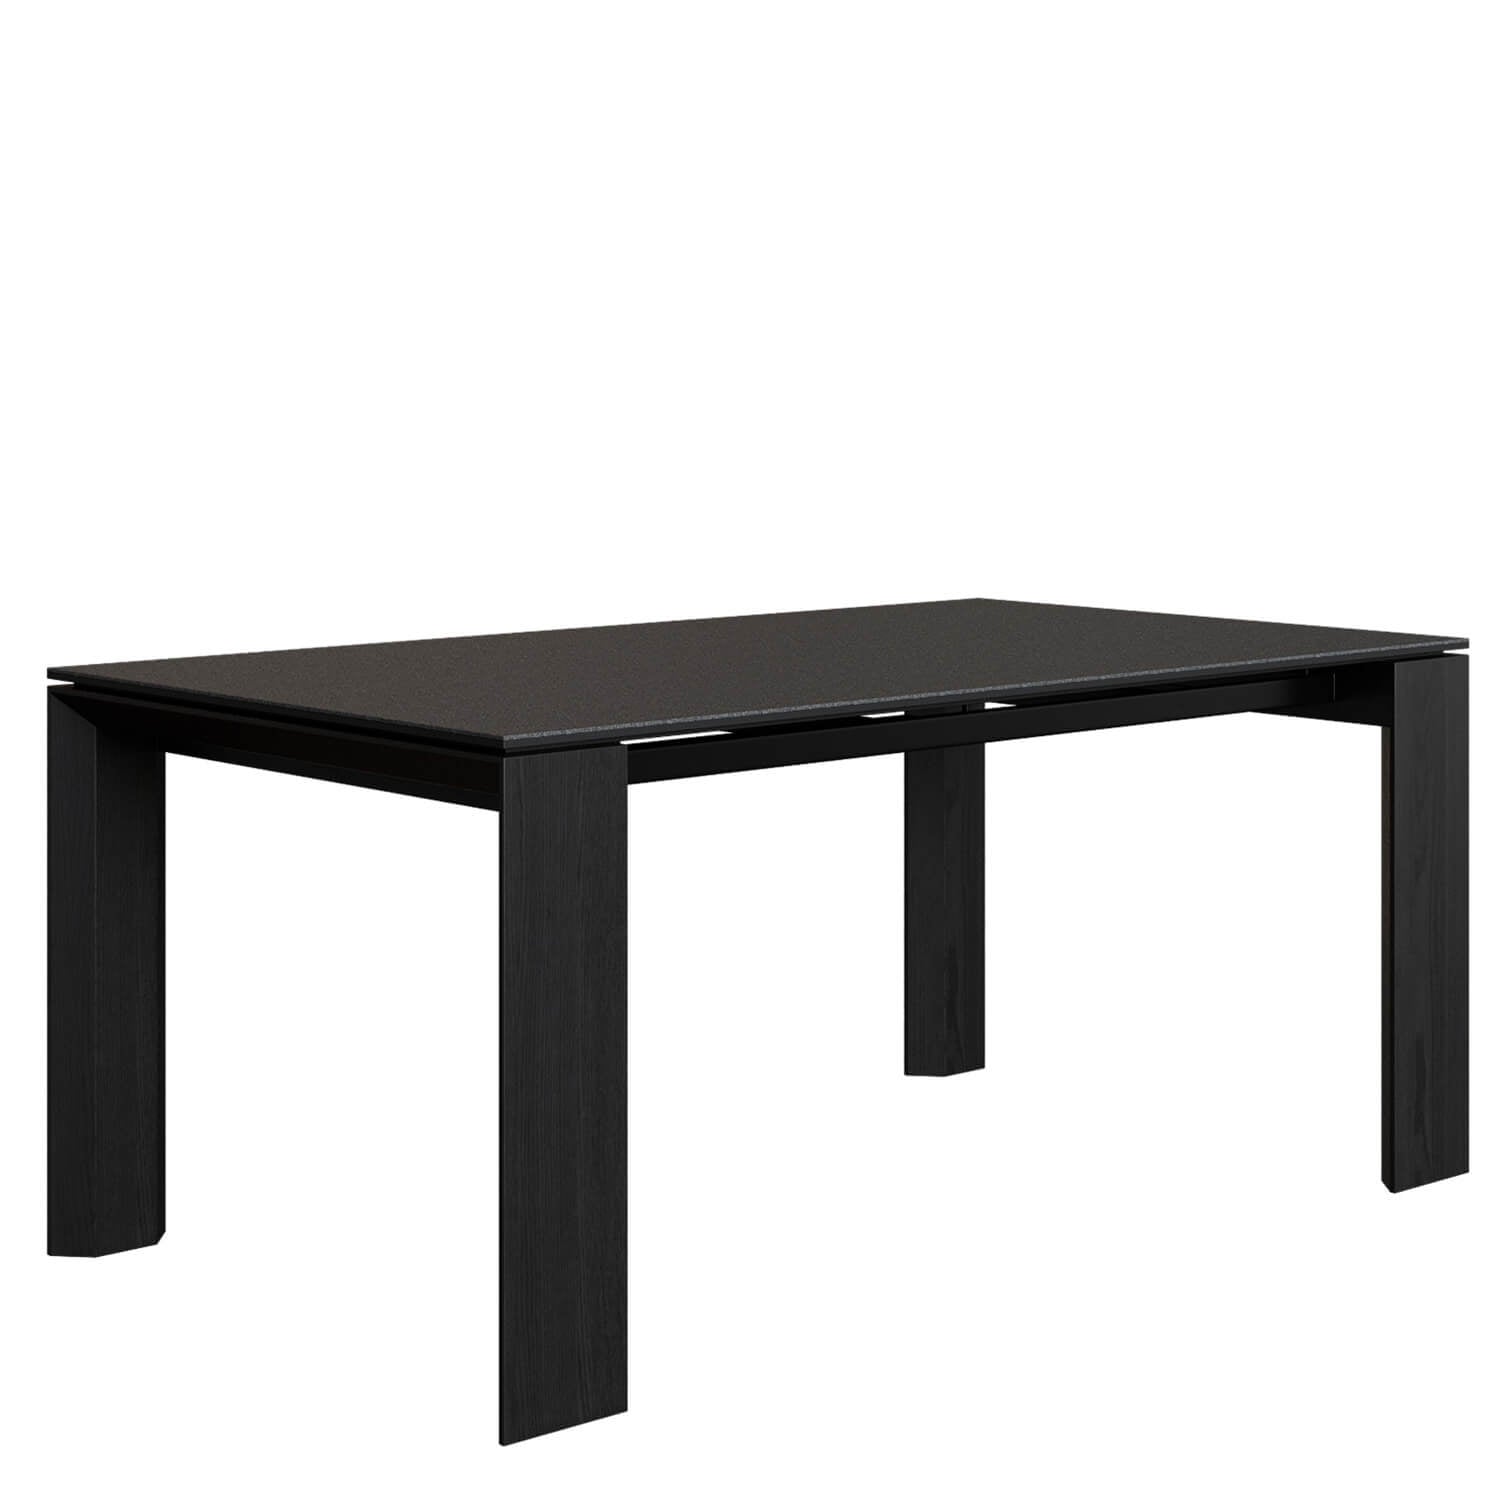 Olevano extension dining table